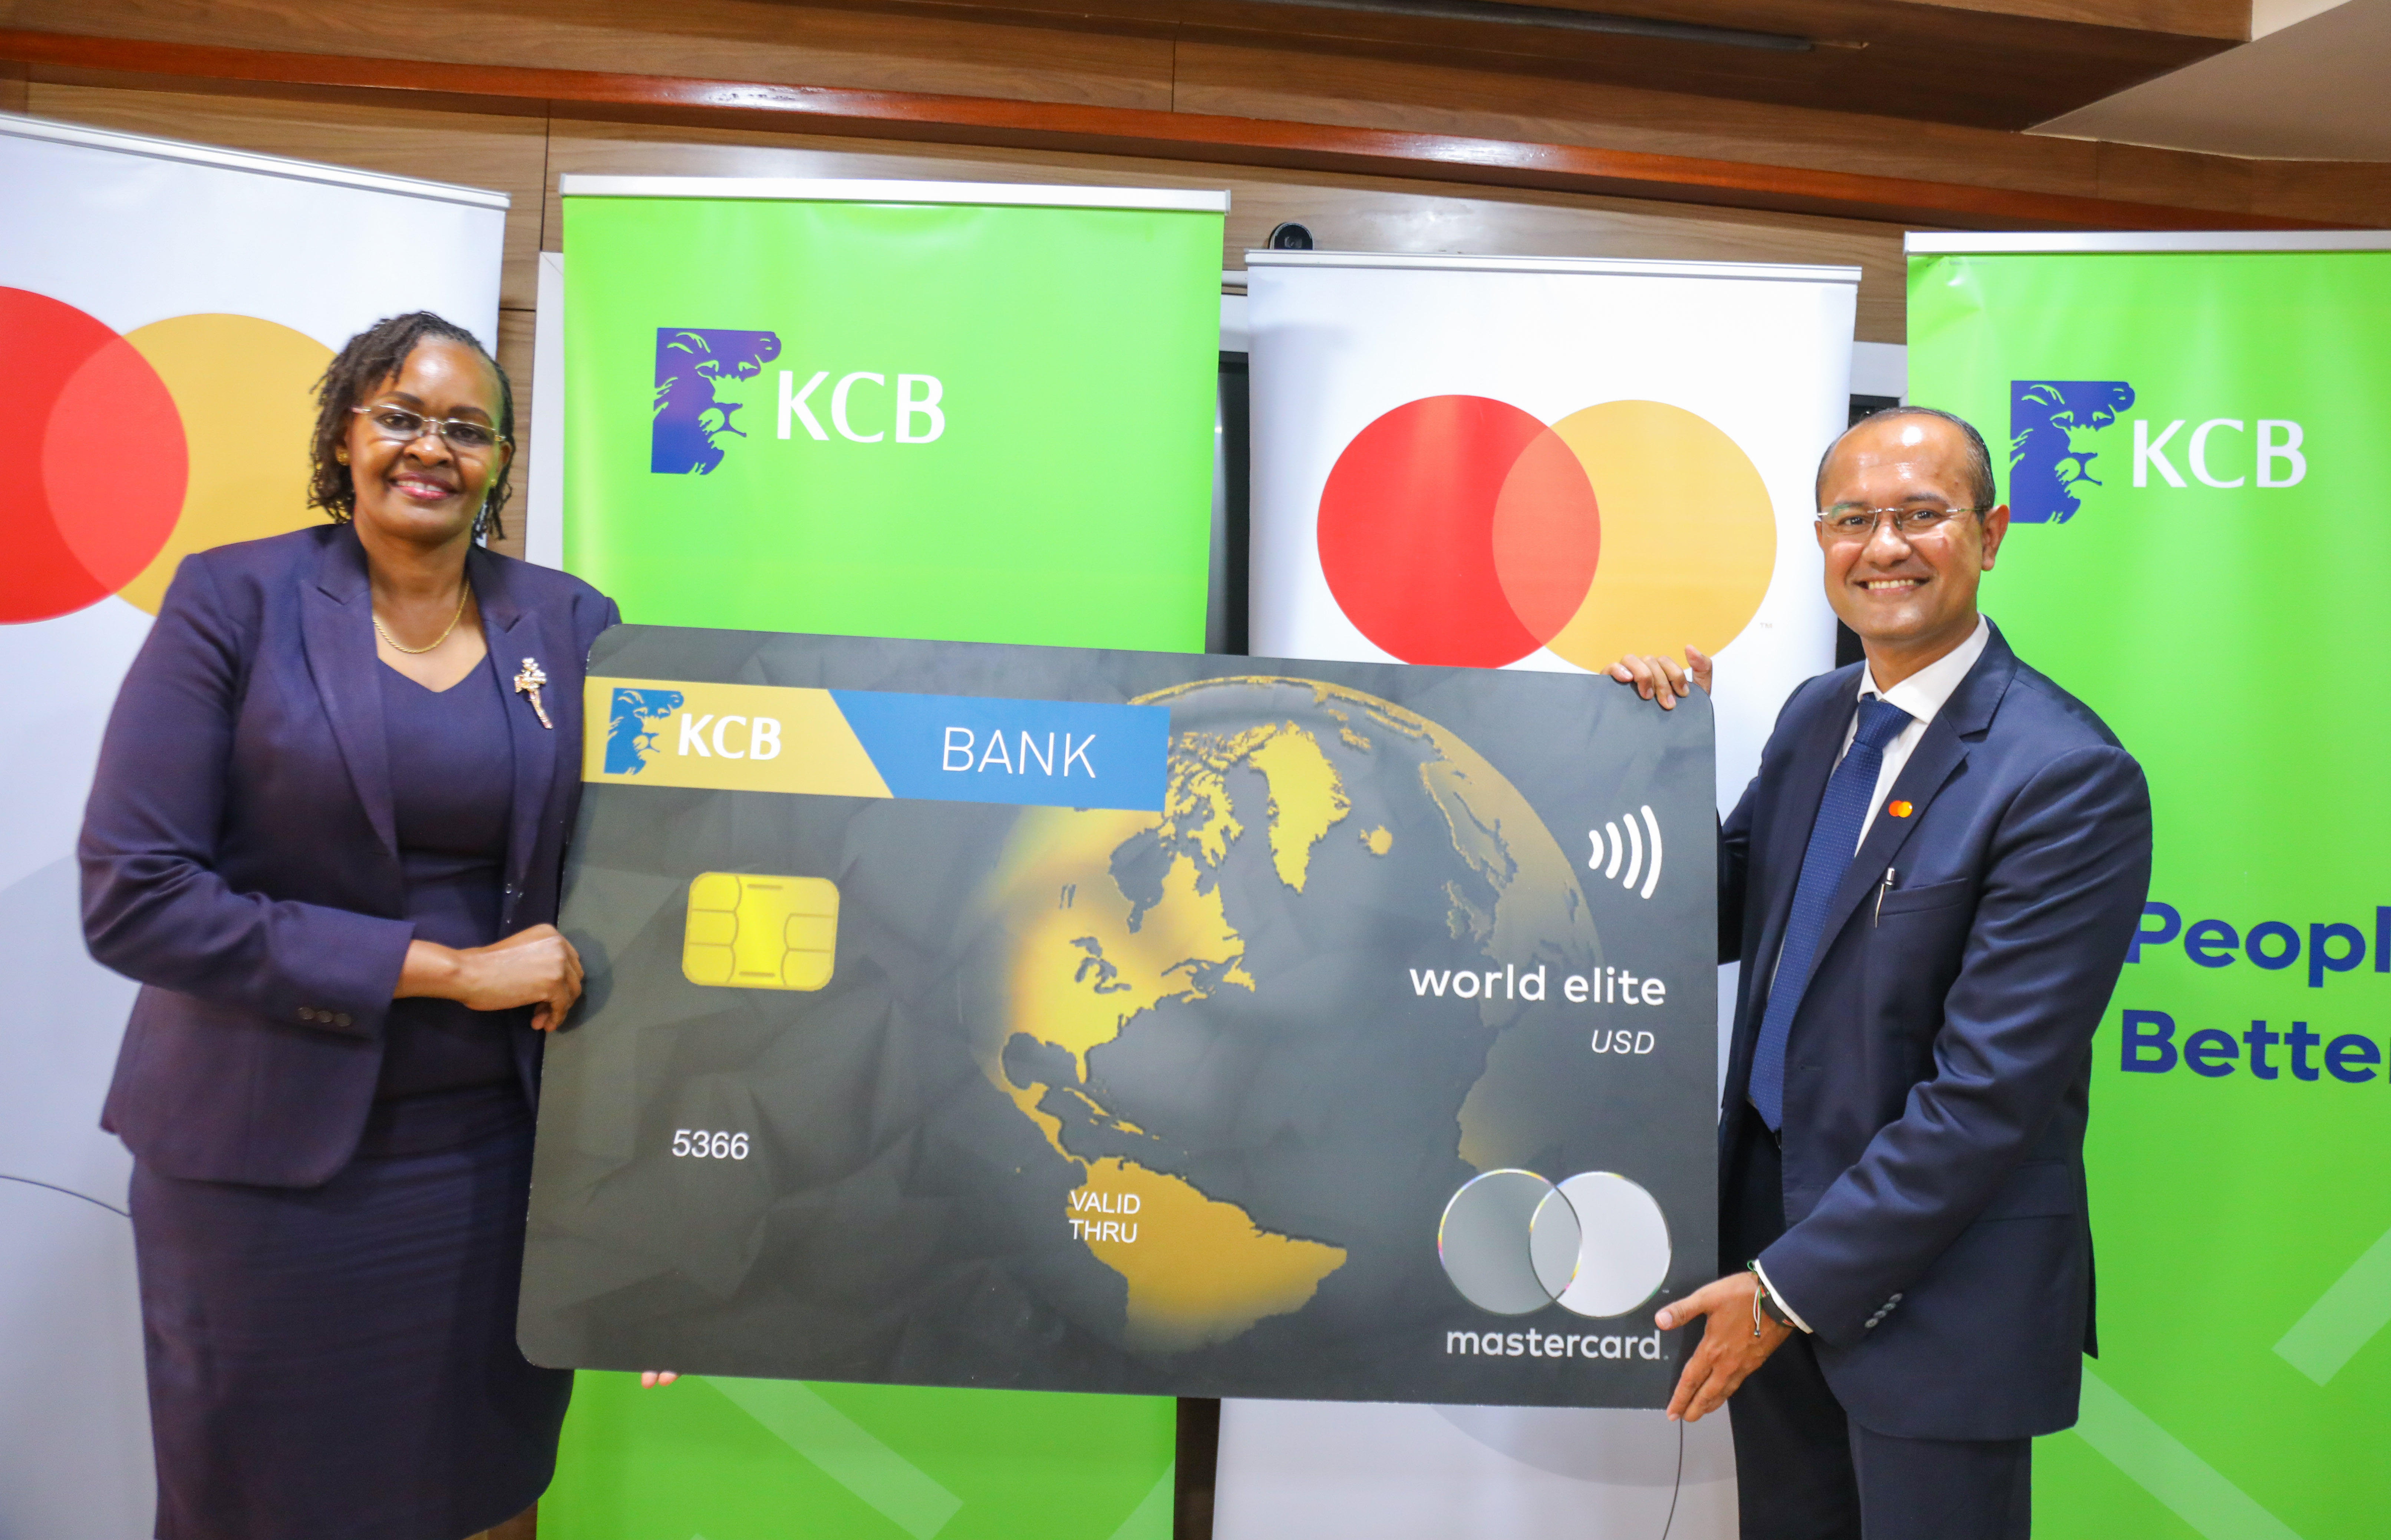 Shehryar Ali, Senior Vice President and Country manager for East Africa and Indian Ocean Islands at Mastercard (Right) and Annastacia Kimtai, KCB Bank Kenya Managing Director(Left) during the official unveiling of the KCB World Elite Card at Kencom Towers, Nairobi.